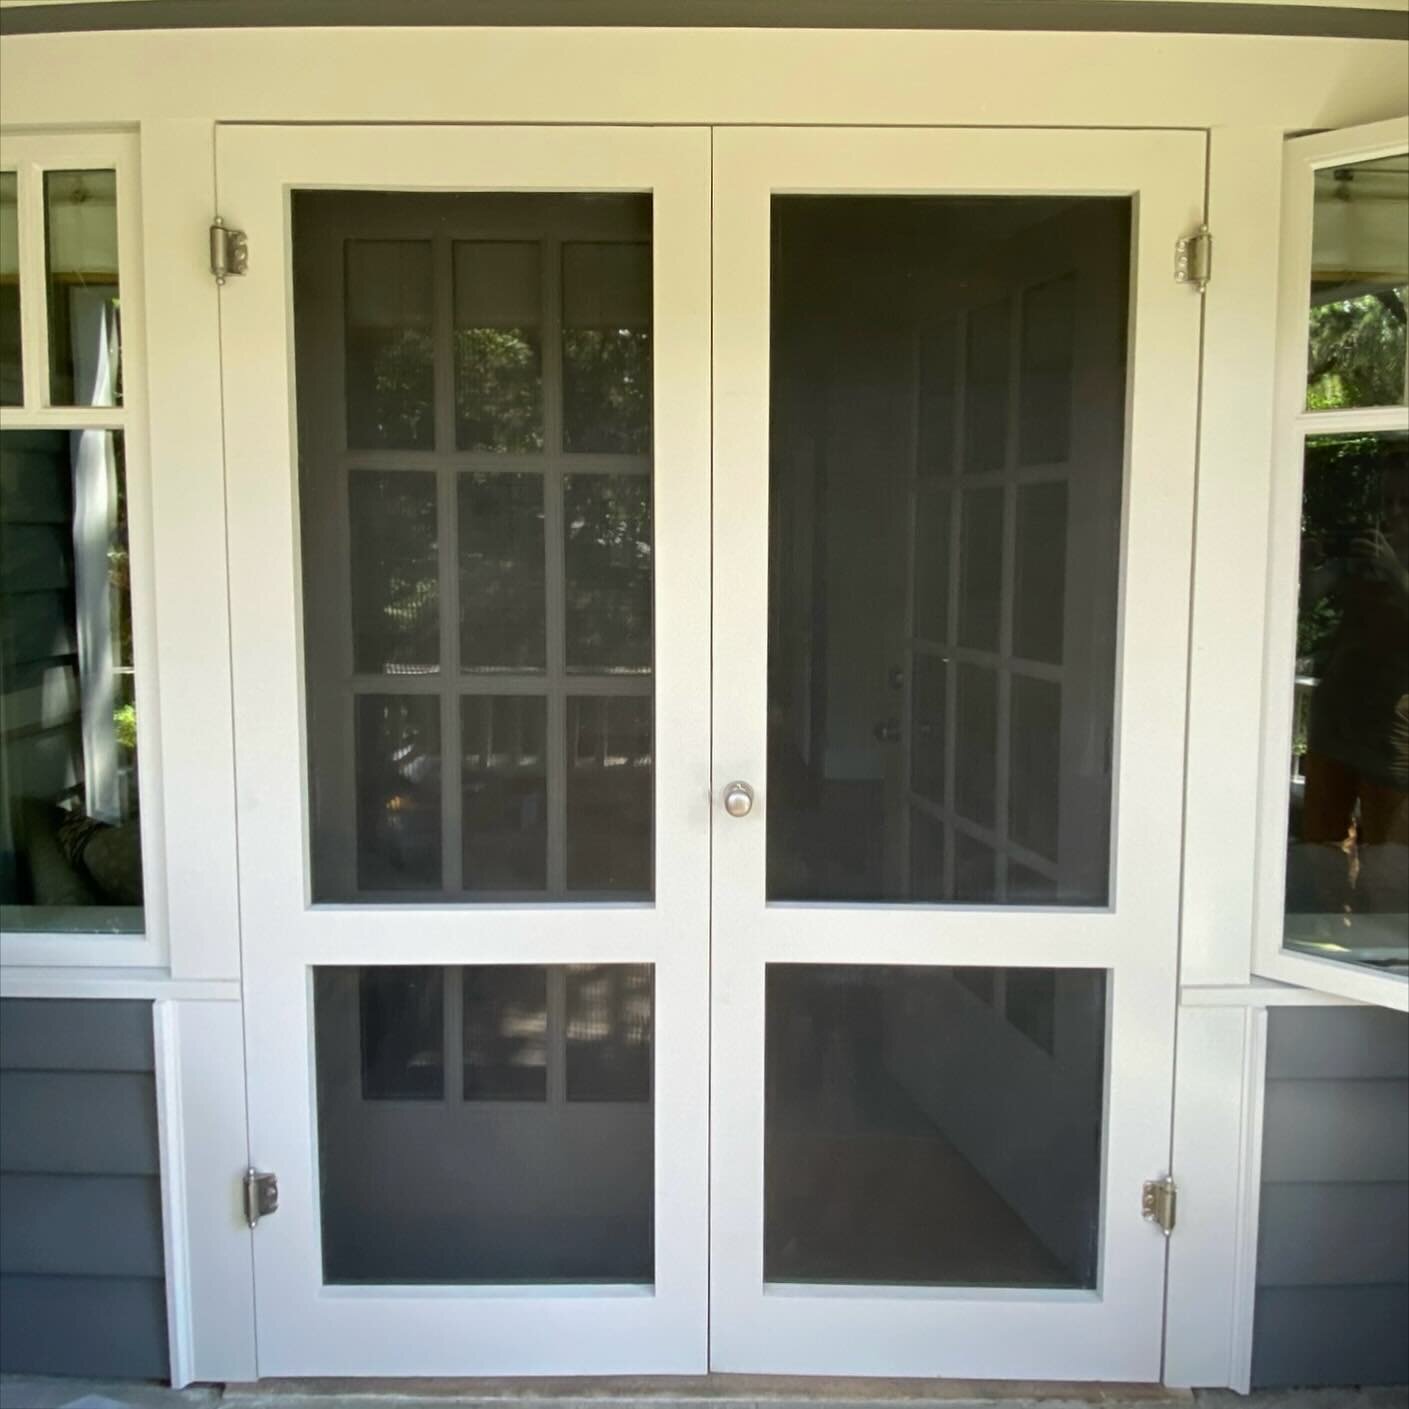 This set of French Doors was crafted for a family in Montlake who wants to enjoy the cool, fresh breeze into their primary bedroom without having to worry about bugs getting in. These screen doors seem to do just the trick. The brushed nickel hardwar